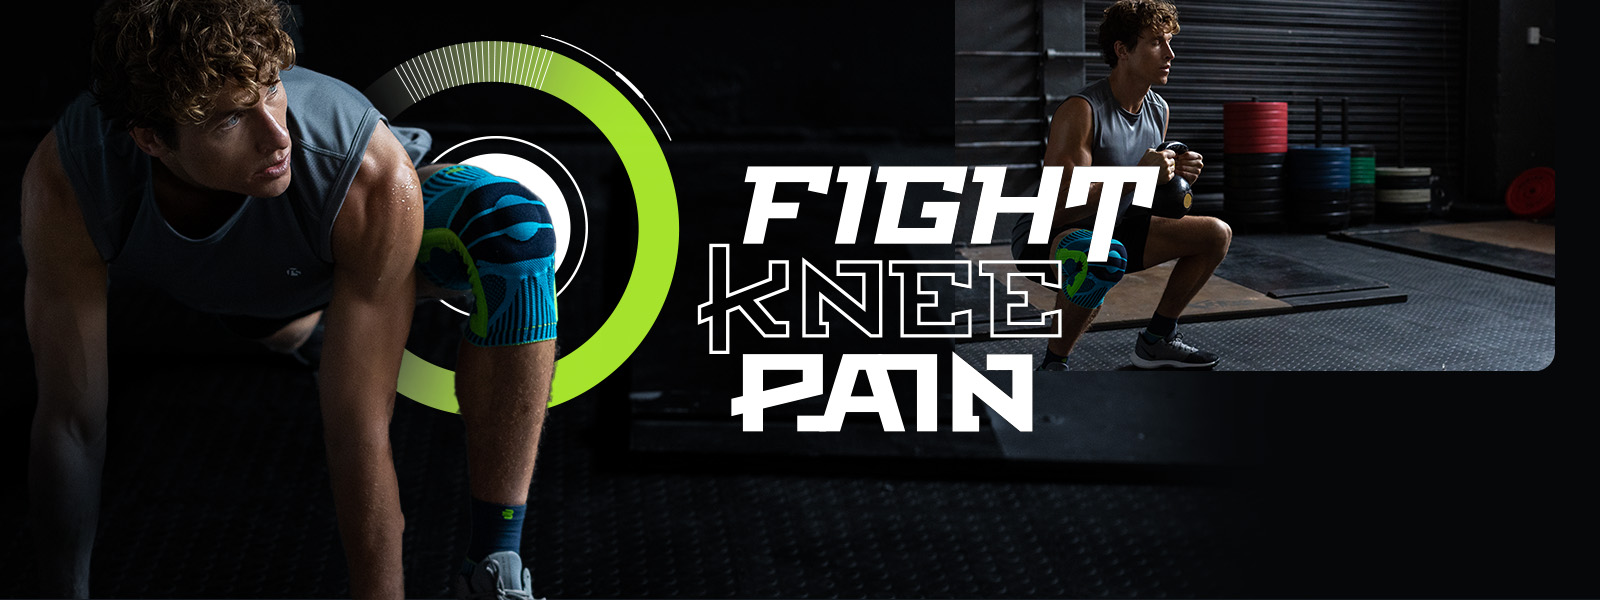 Fight Knee Pain Promo Banner with a man who does fitness exercises with whom he wears a kneege